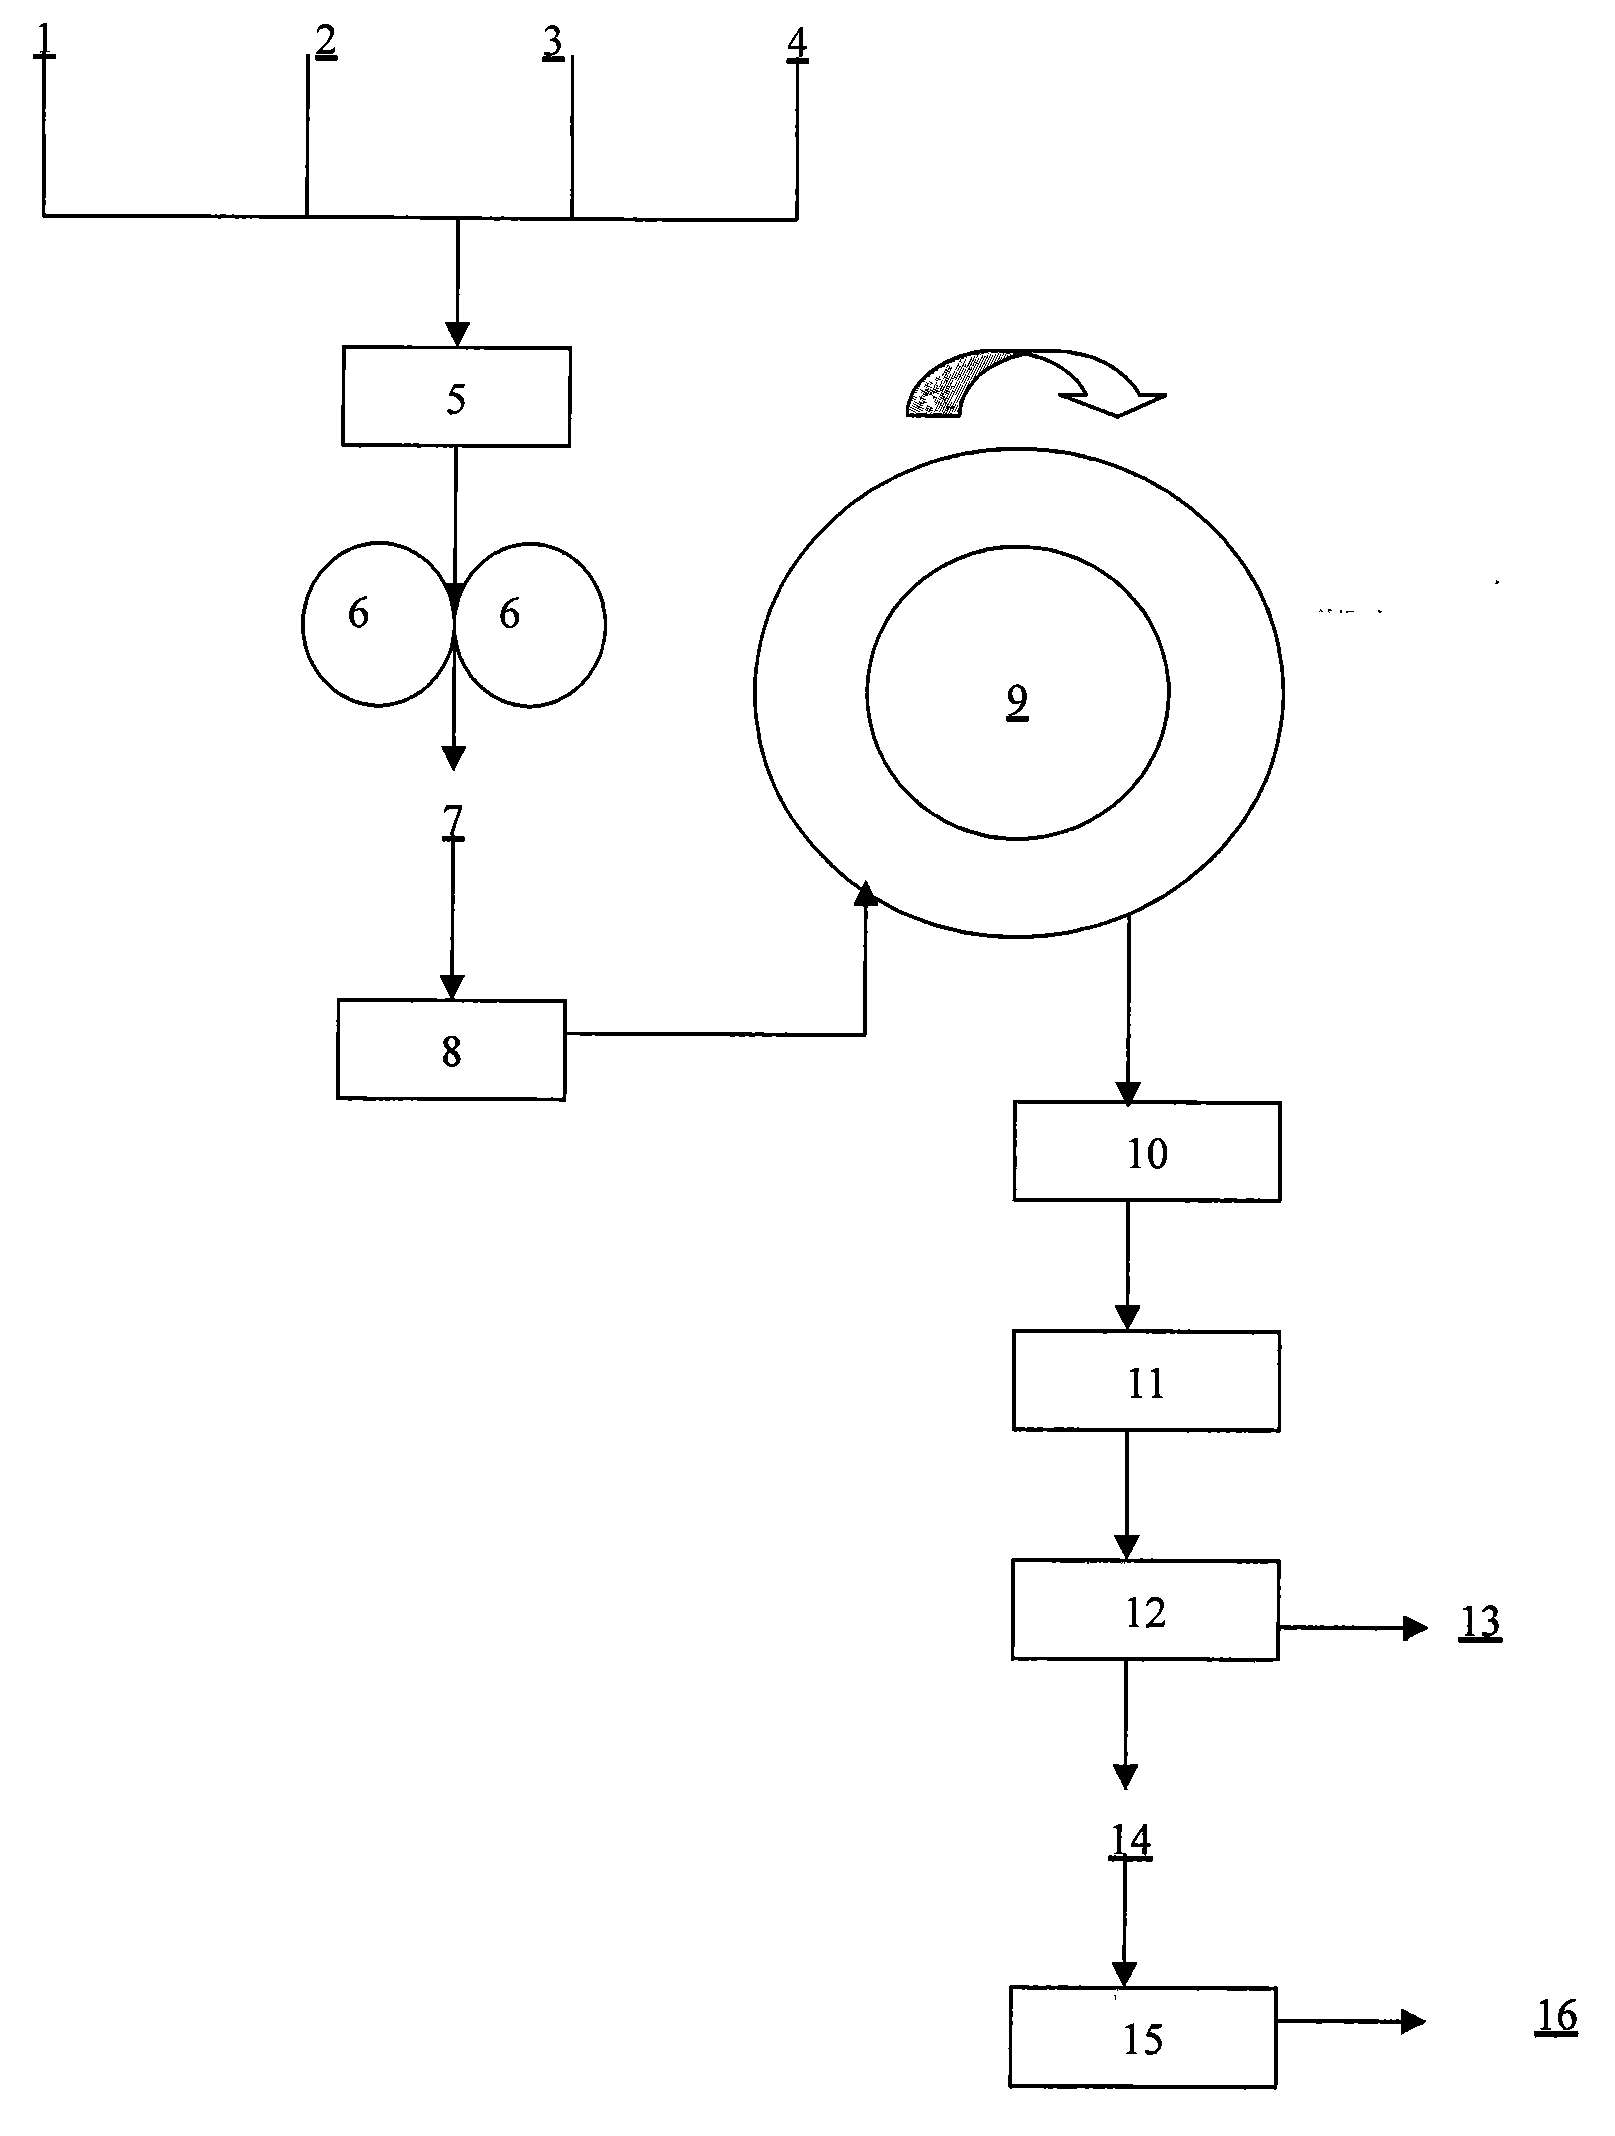 Method for smelting nickel-iron alloy from laterite nickel oxide ore